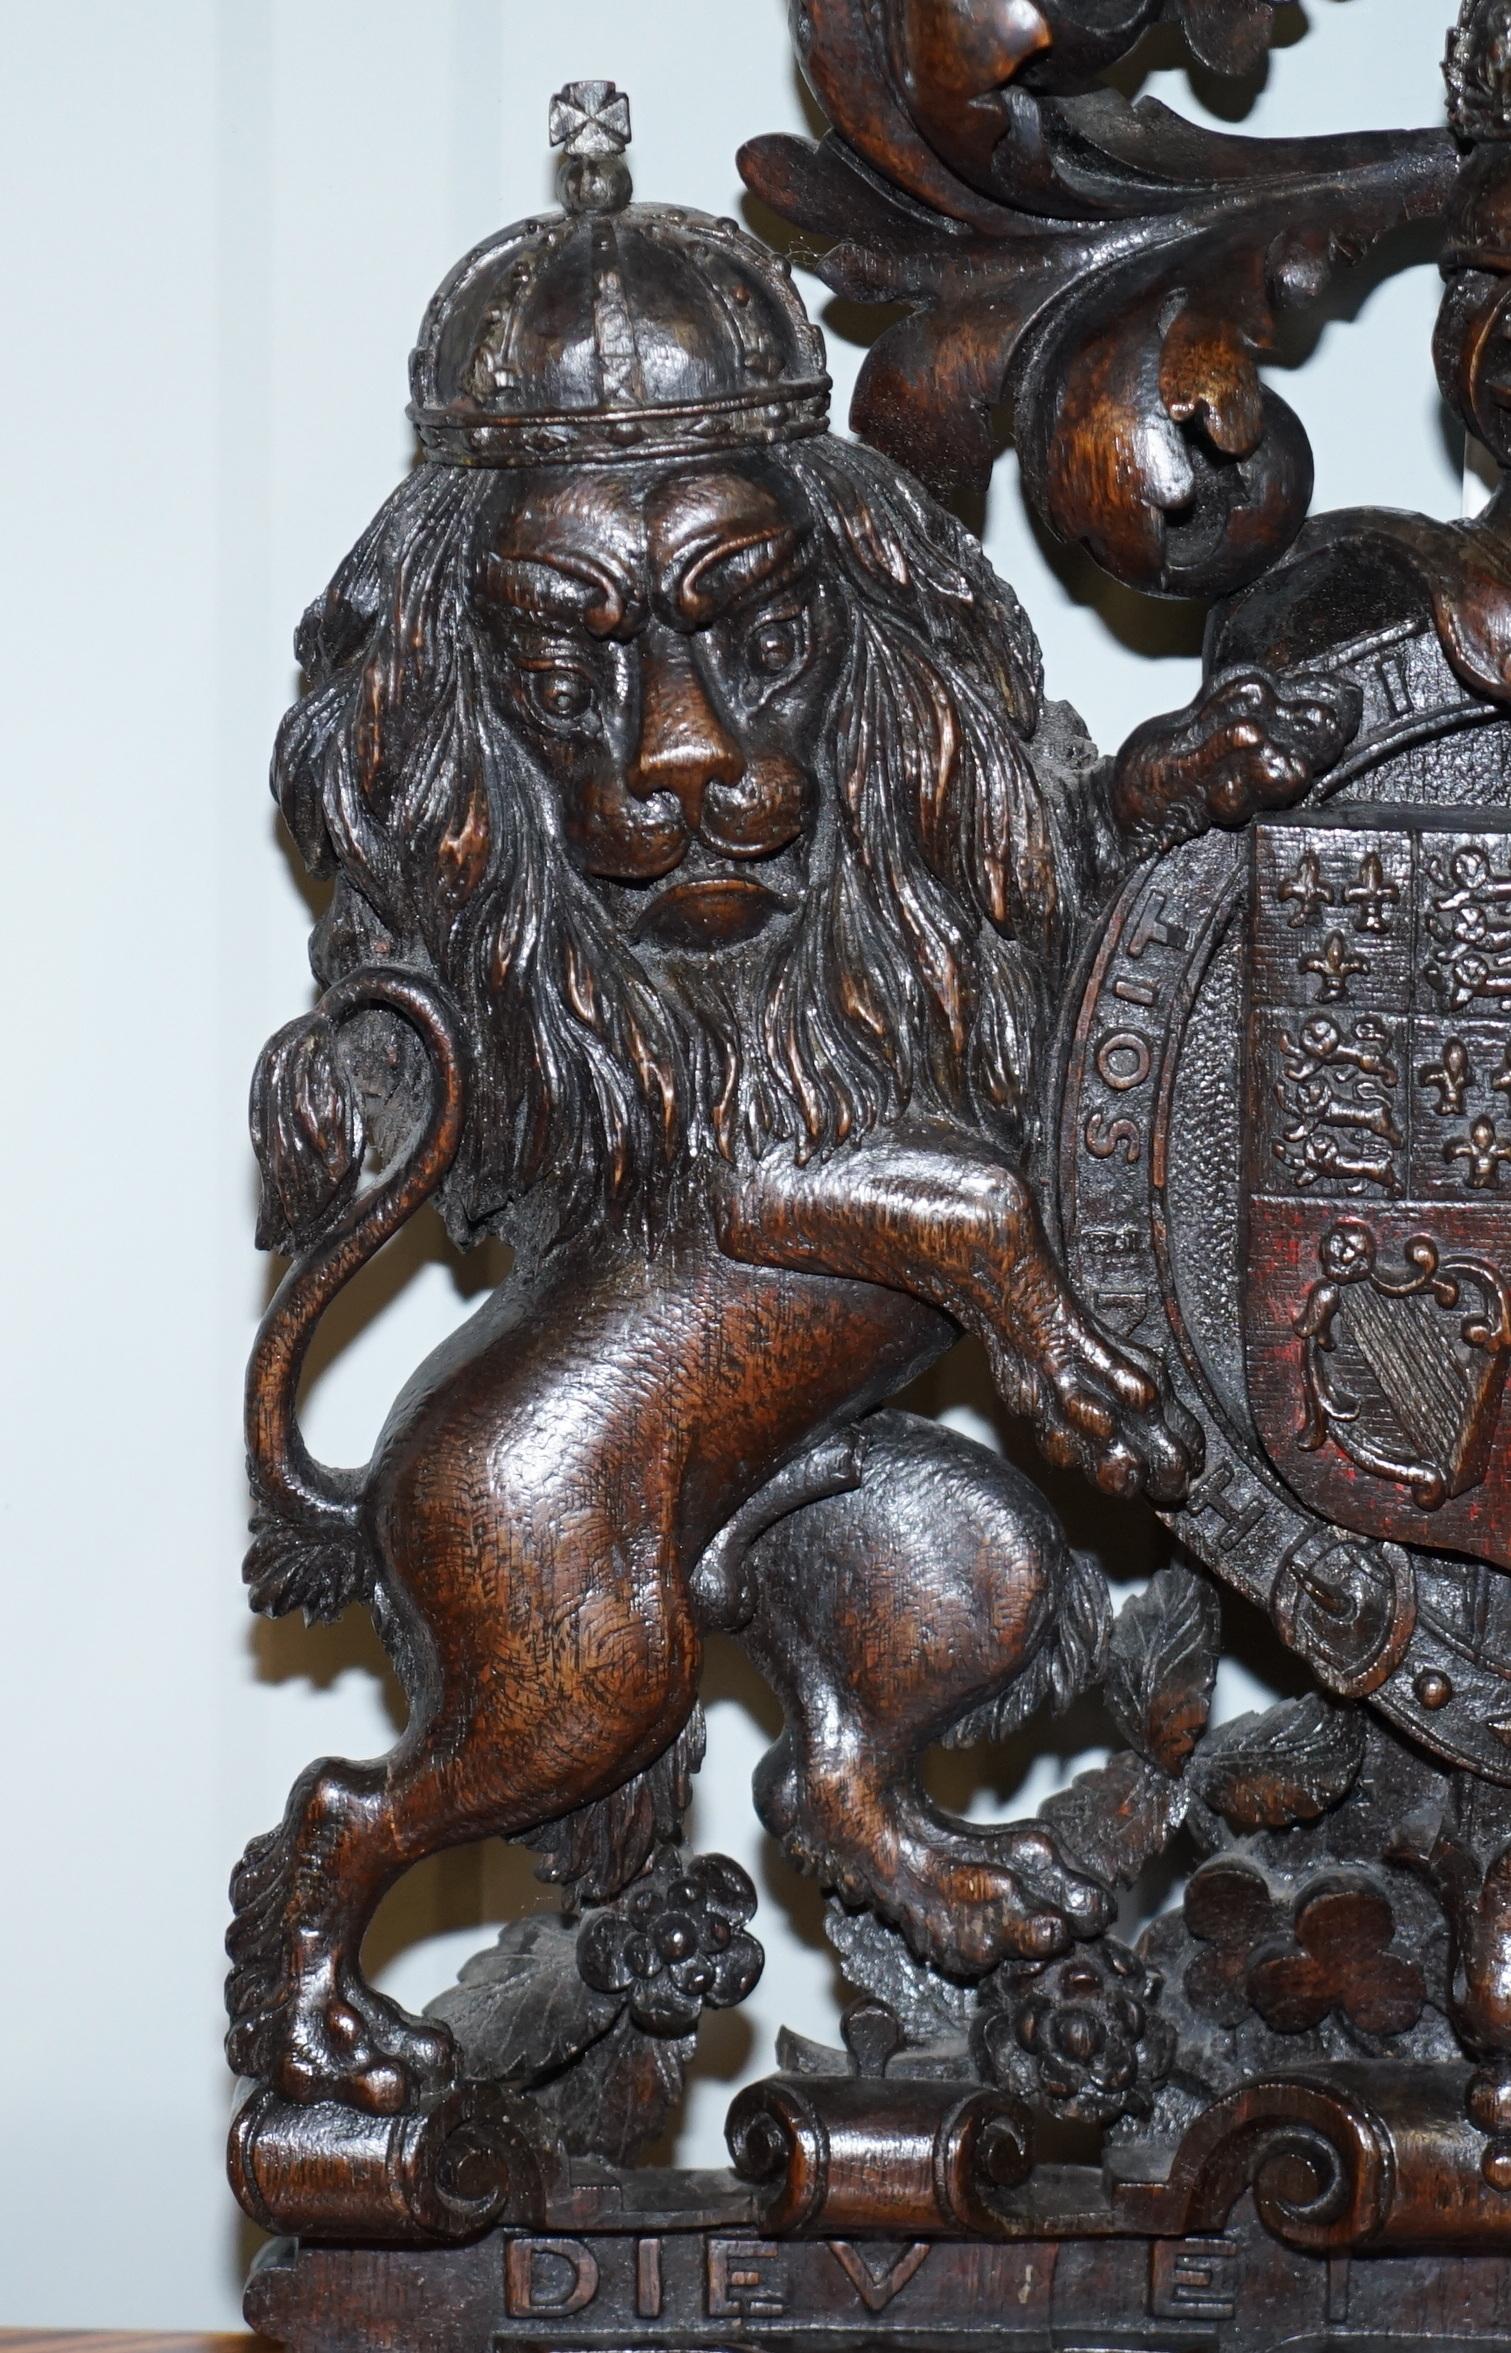 Mid-17th Century Hand Carved Charles II English Royal Coat of Arms 1660-1685 Armorial Crest